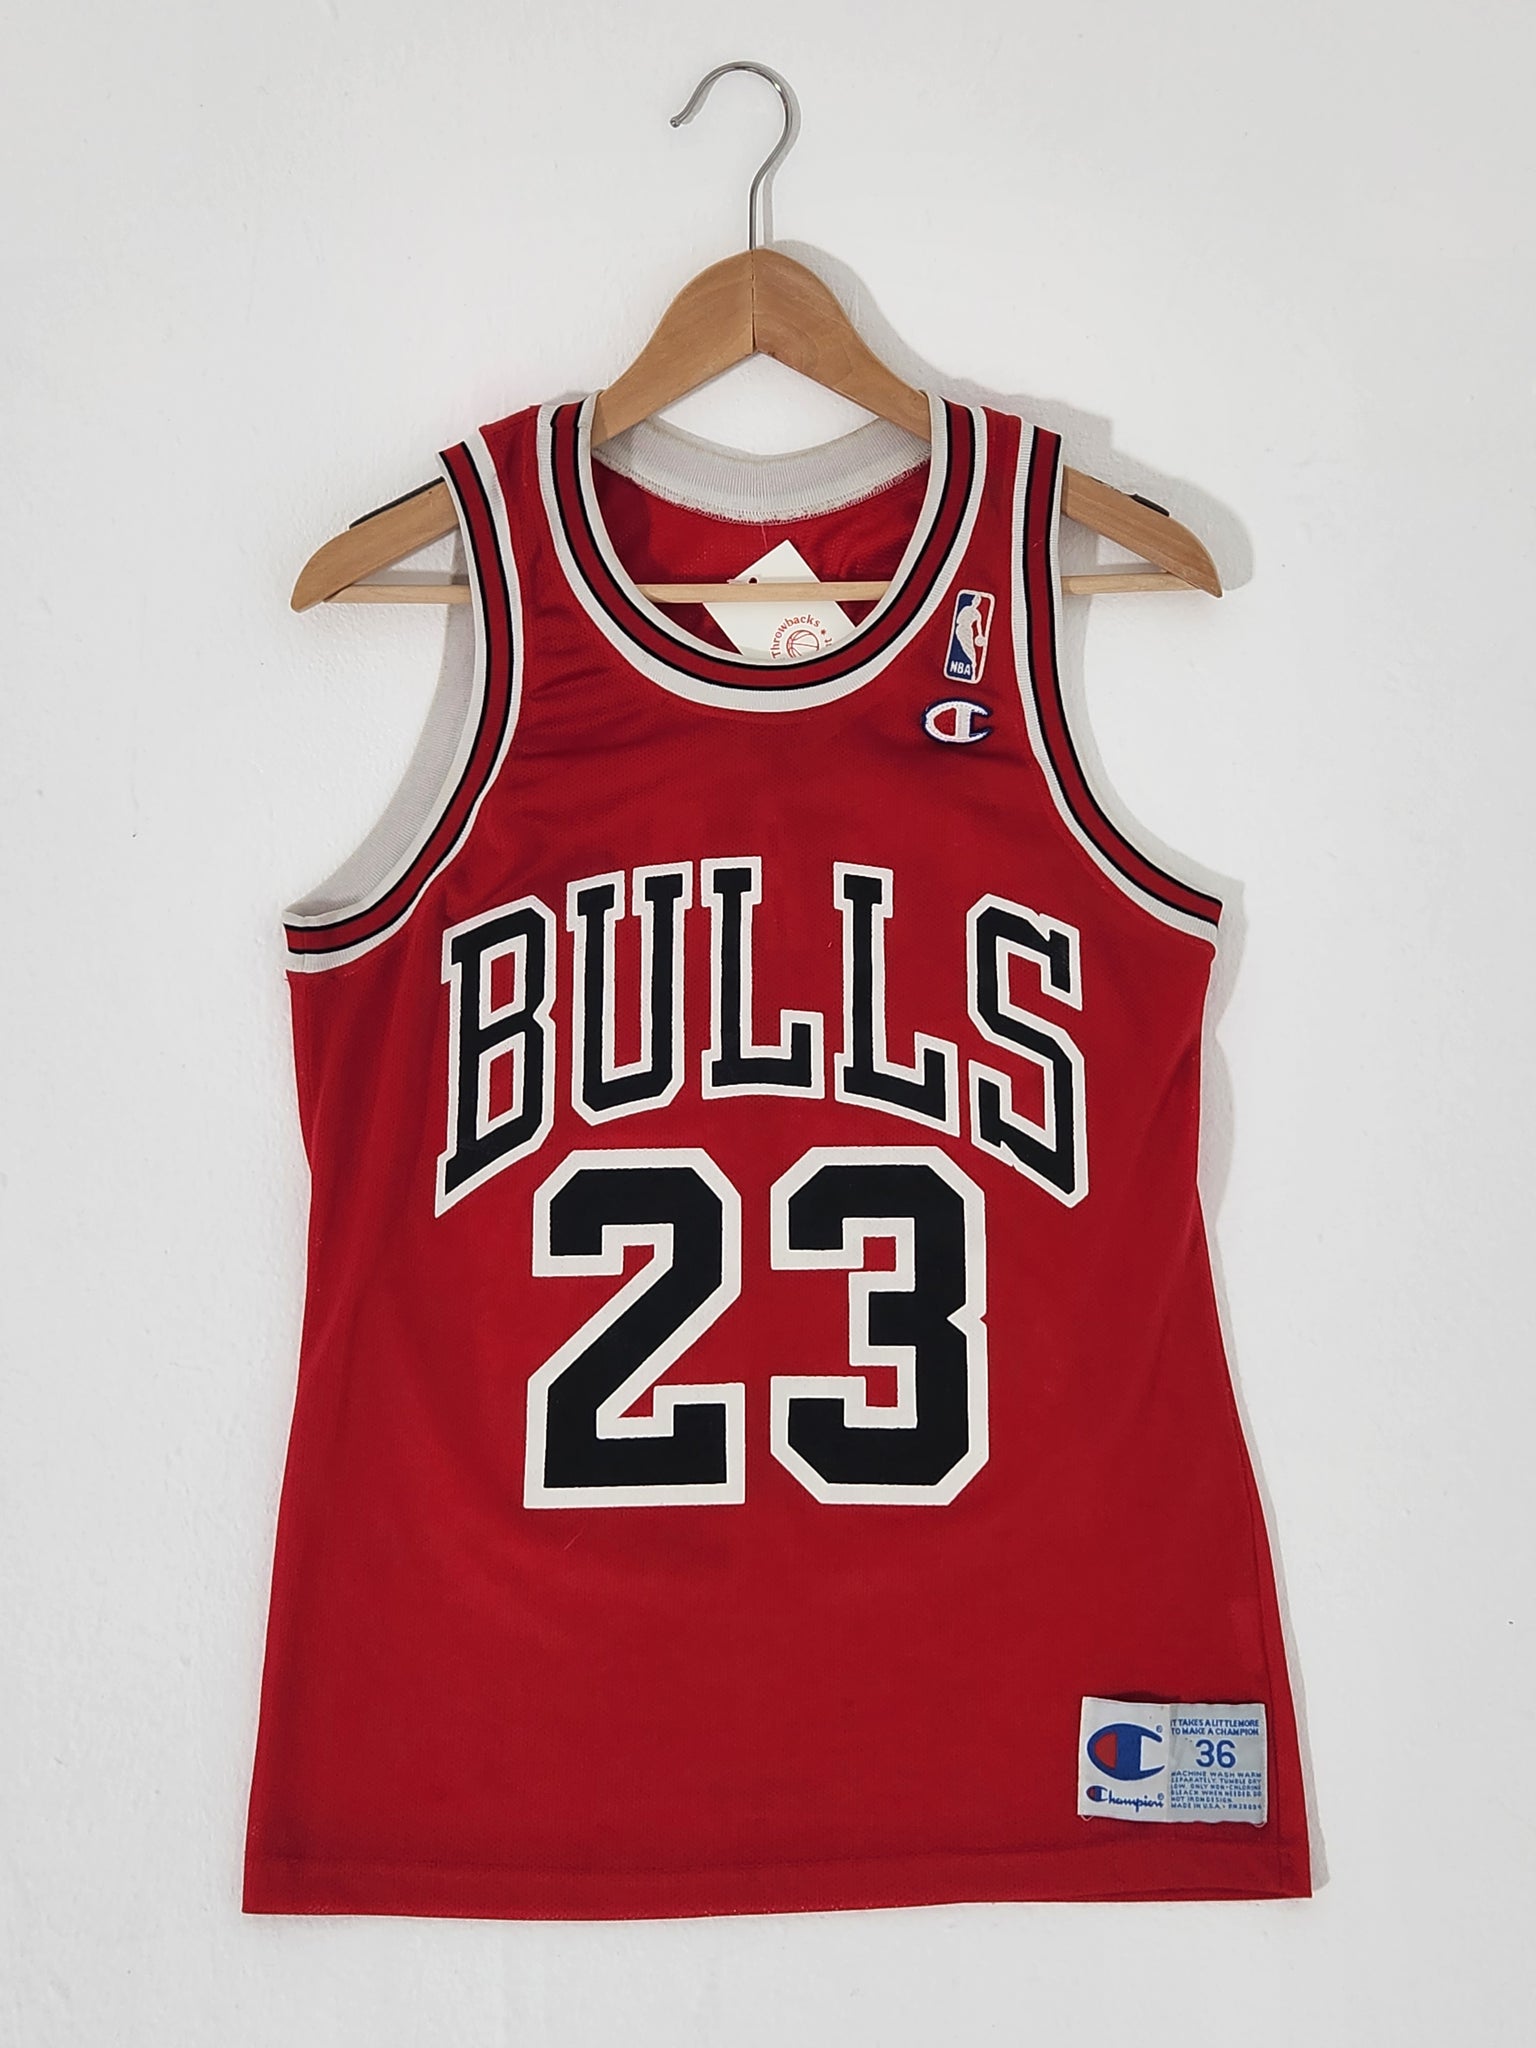 Vintage Champion Chicago Bulls Jordan jersey. Made in the USA.